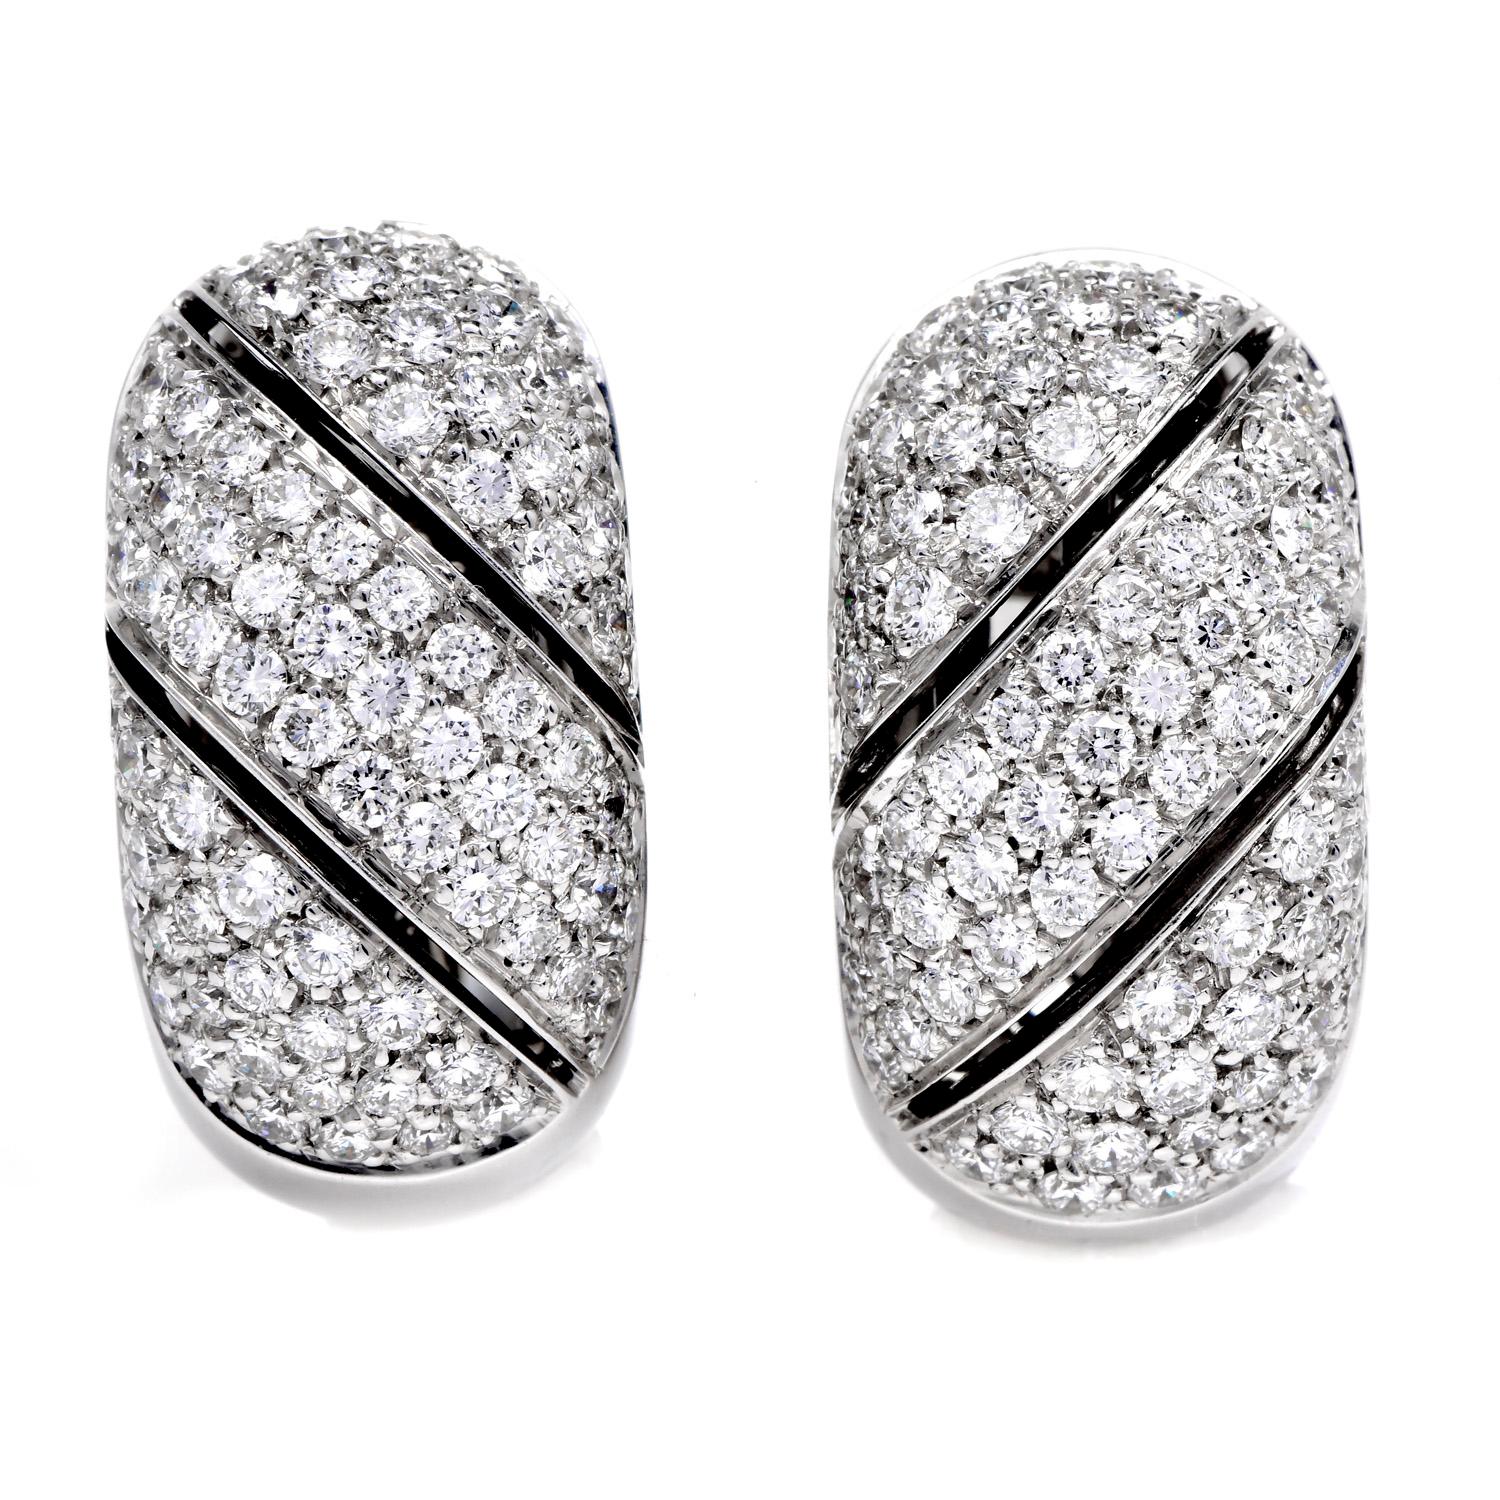 Timeless Elegance and Dazzling Sparkle, With Italian-made Damiani Design earrings.

Make these 18k hoop Earrings ready to shine,  Crafted in Solid 18k white gold, with extra white and clean 166 Round Cut Diamonds with a total carat weight of